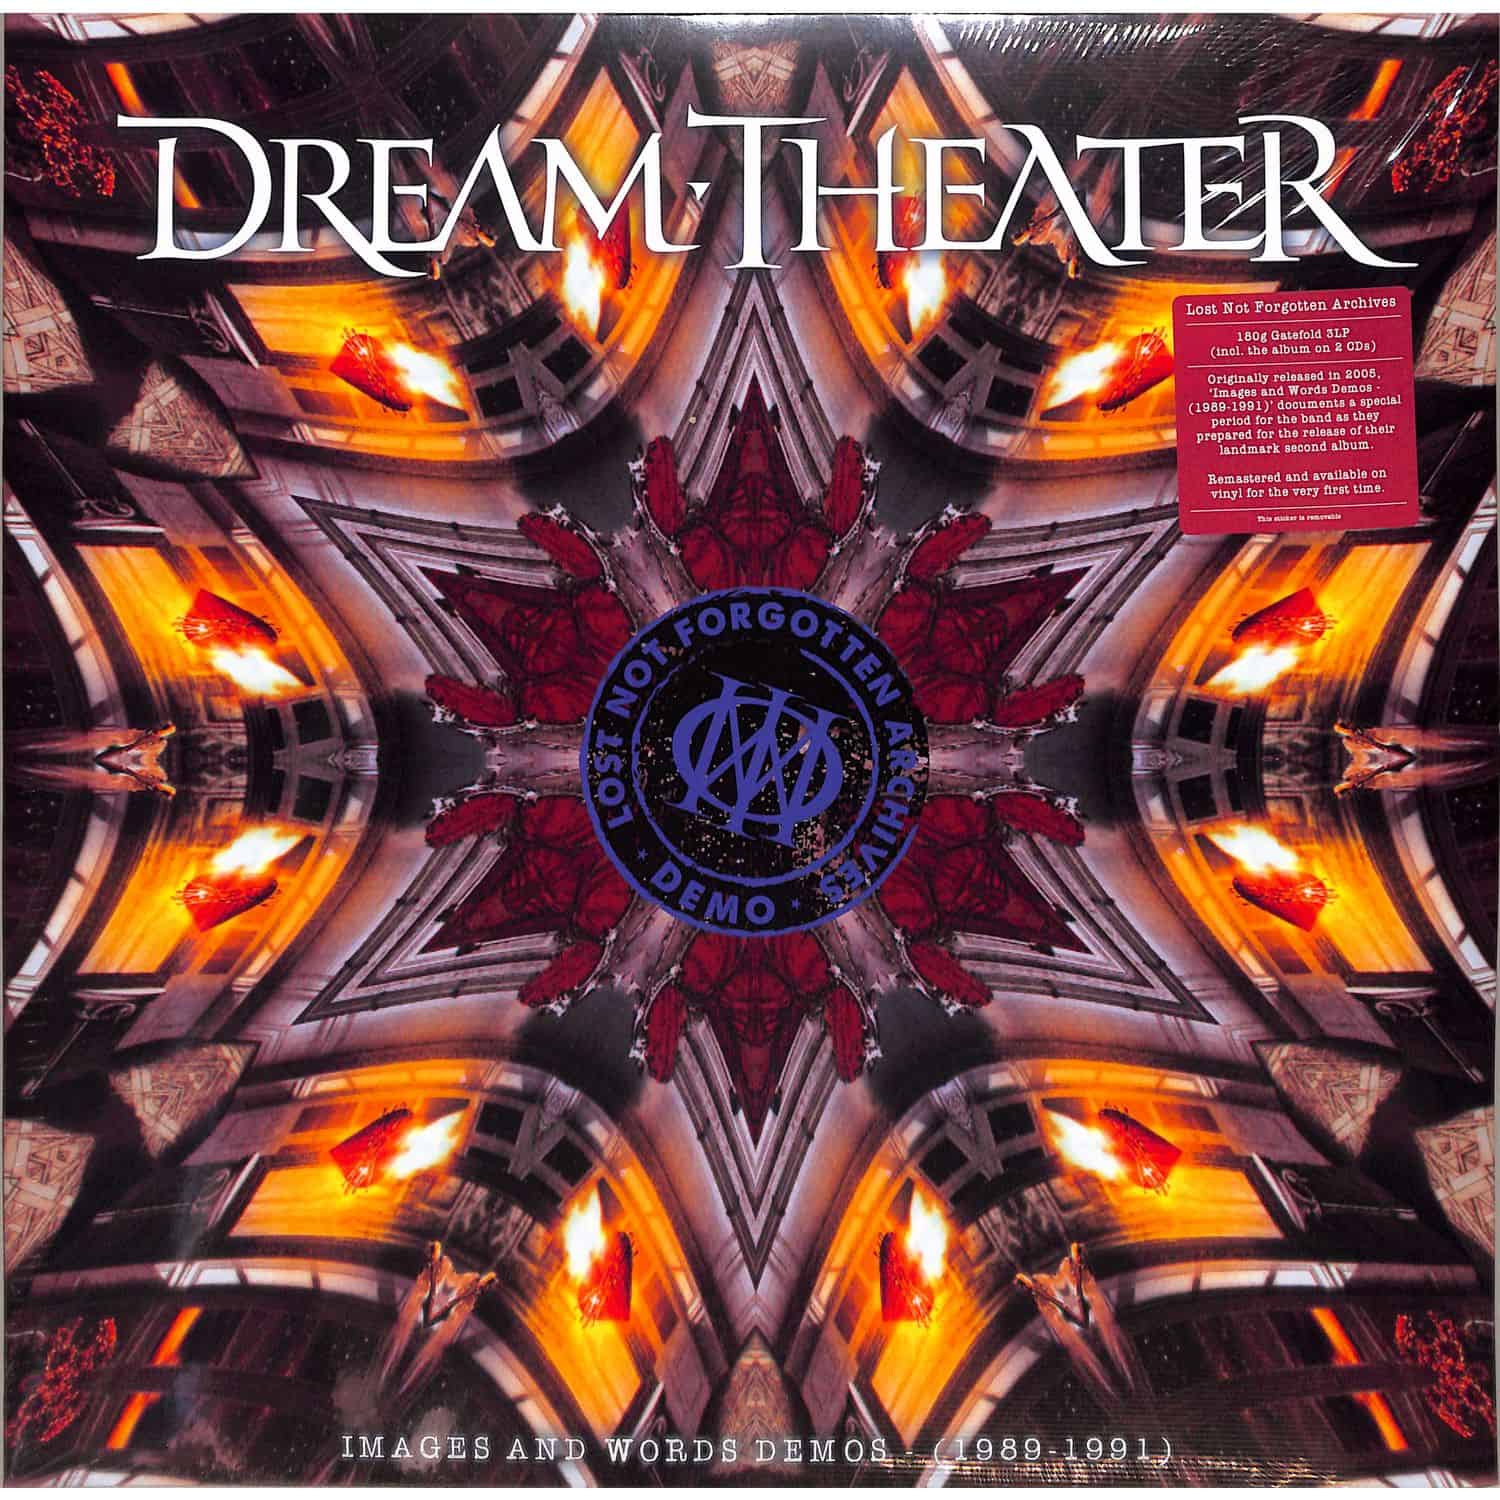 Dream Theater - LOST NOT FORGOTTEN ARCHIVES: IMAGES AND WORDS DEMO 